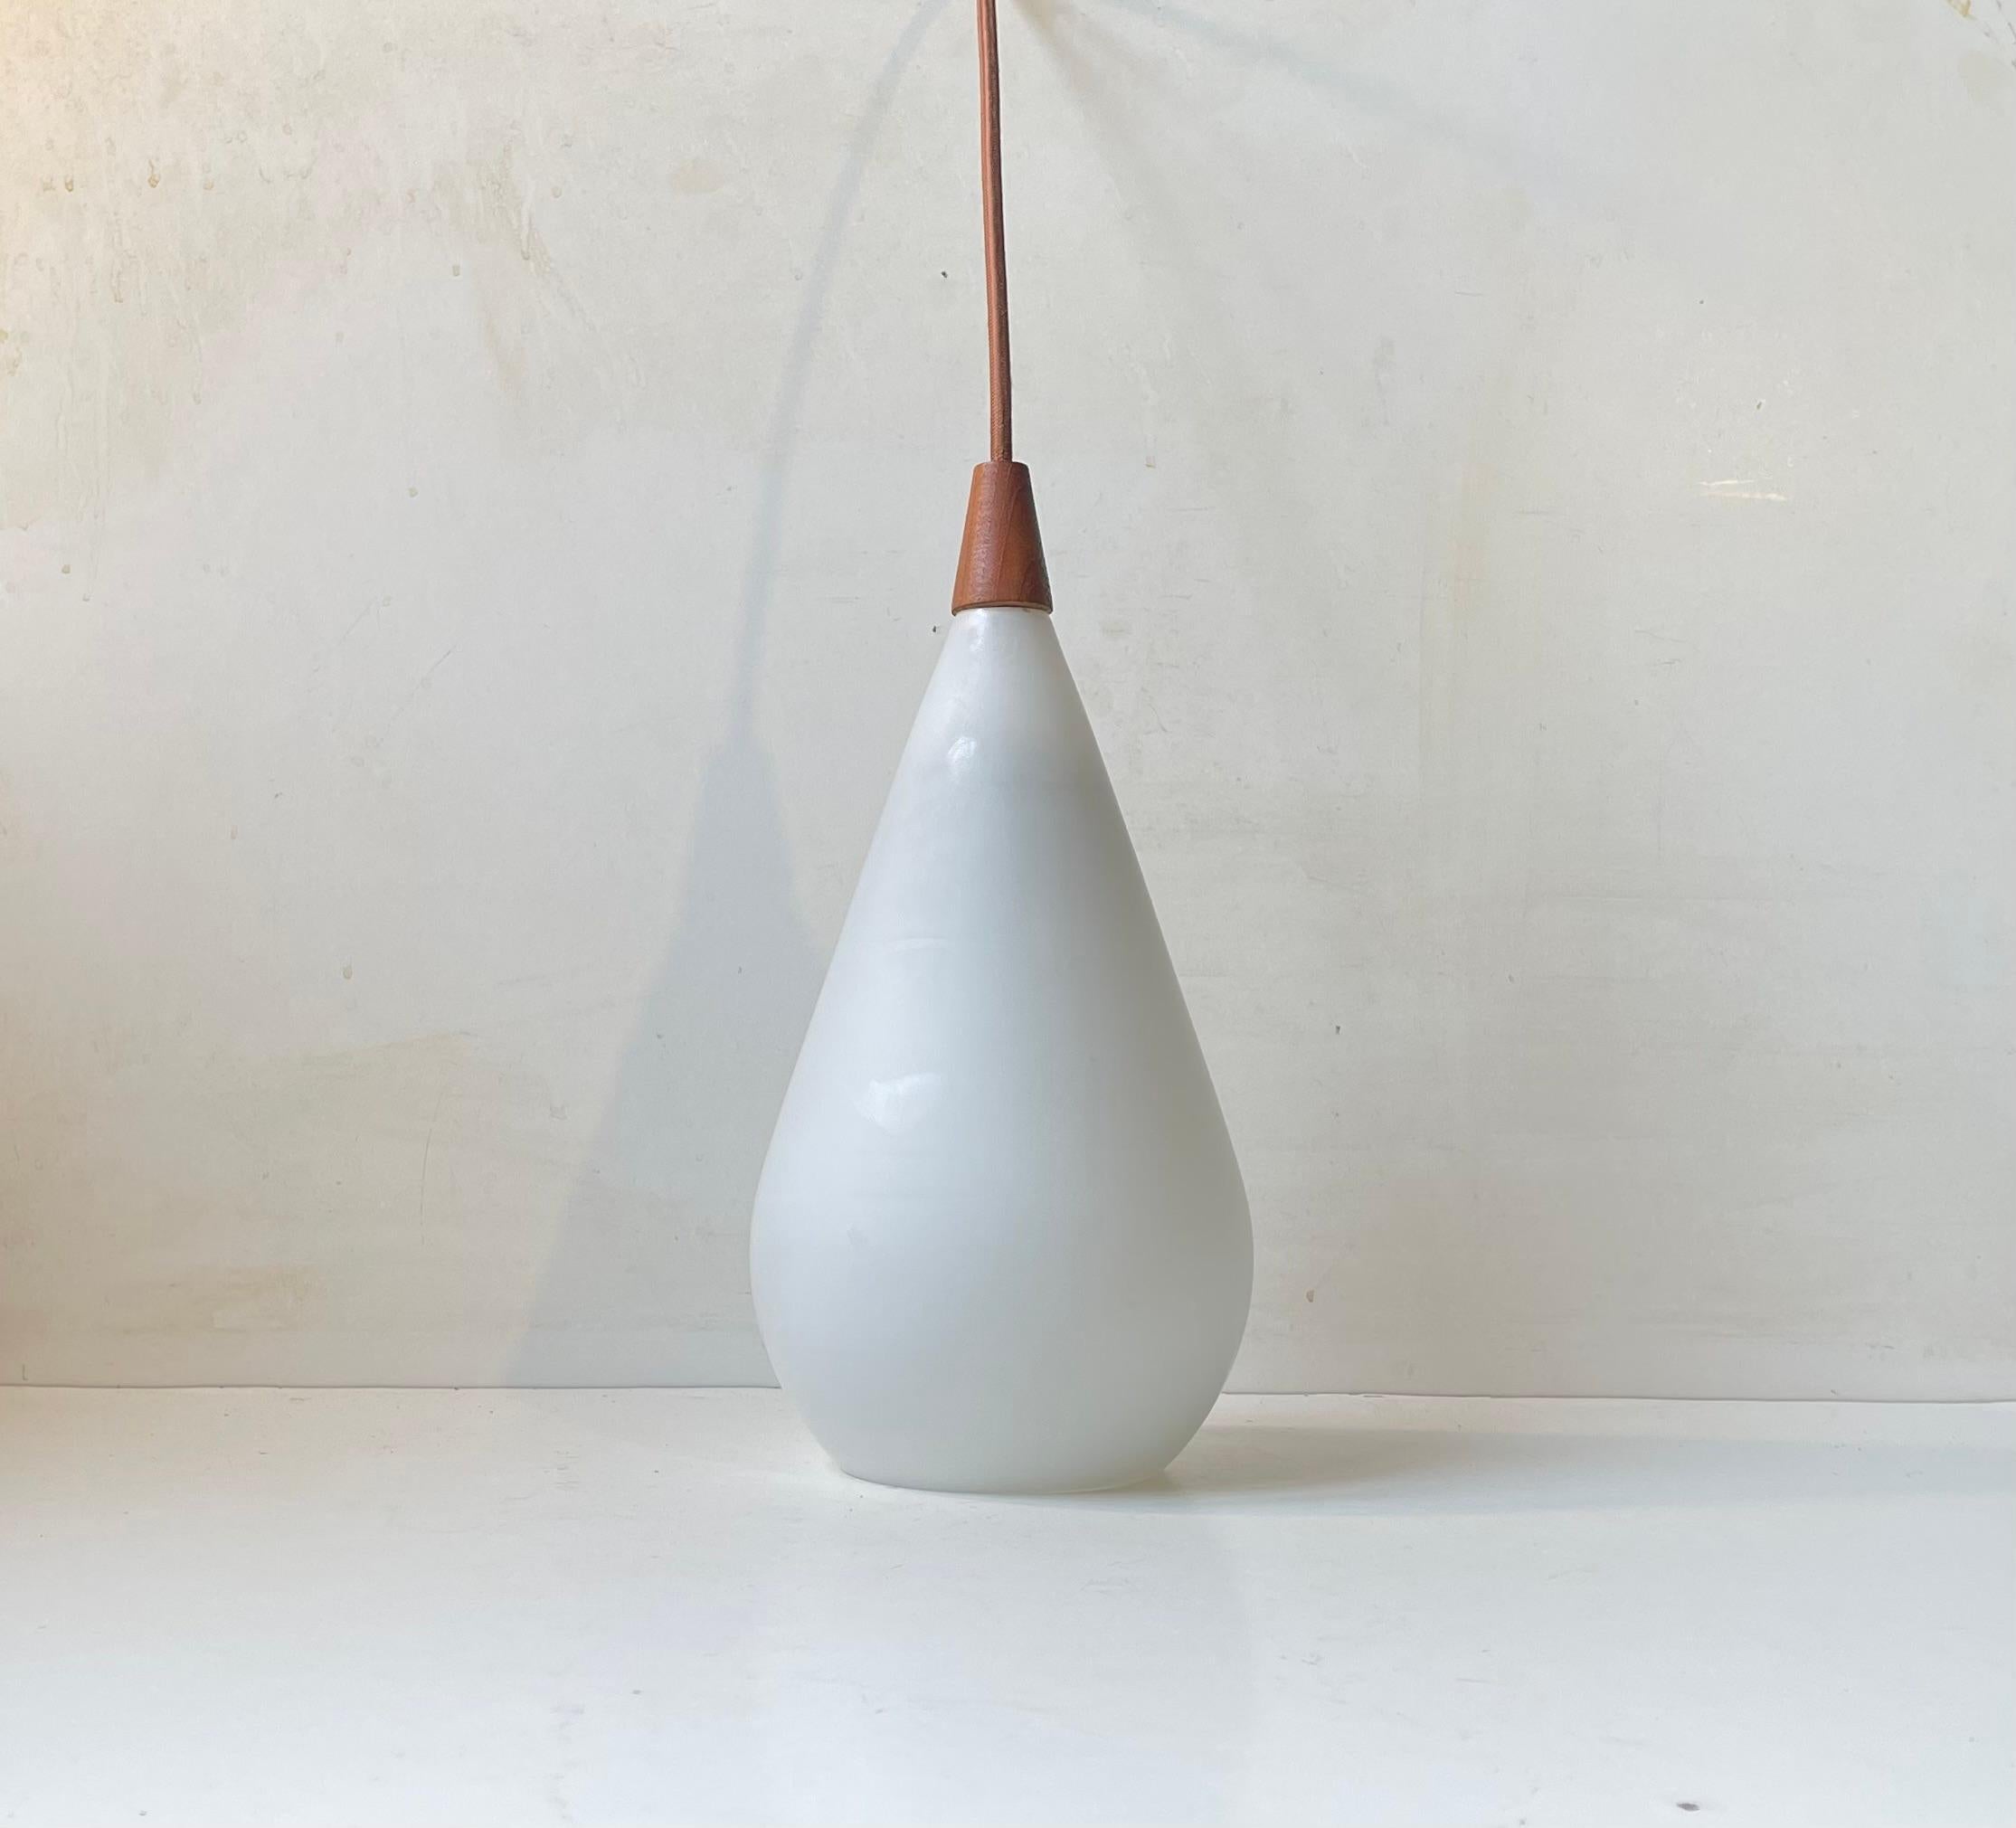 A simple Swedish Modern pendant light constructed of a blown matte opaline glass and a stylish top in solid teak. Designed by Uno and Ôsten Kristiansson and manufactured by Luxux in Sweden circa 1960-65. The lamp features a new brown textile cord.